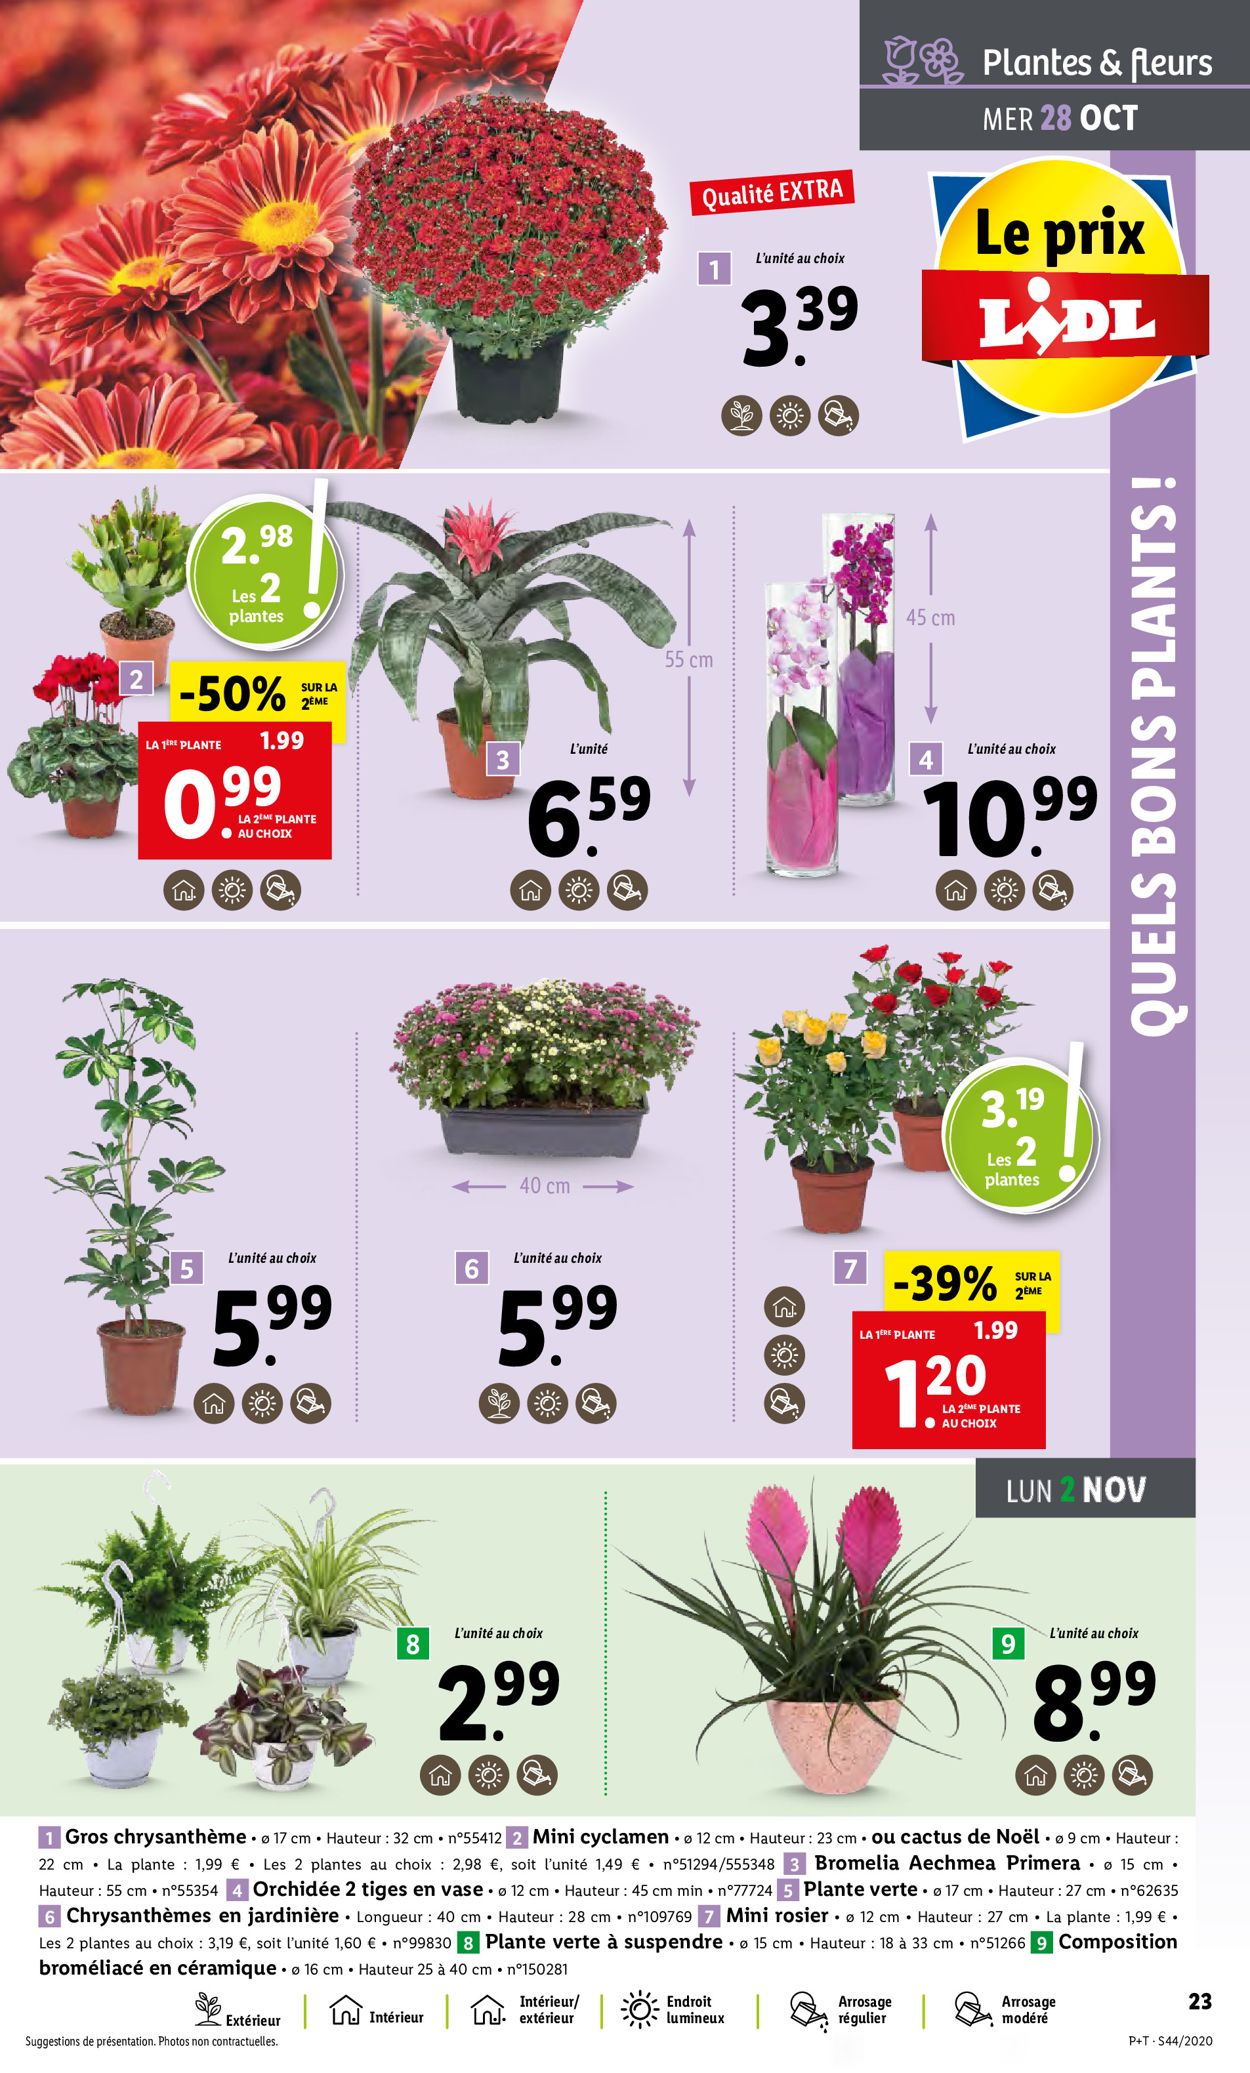 Lidl Catalogue - 28.10-03.11.2020 (Page 25)